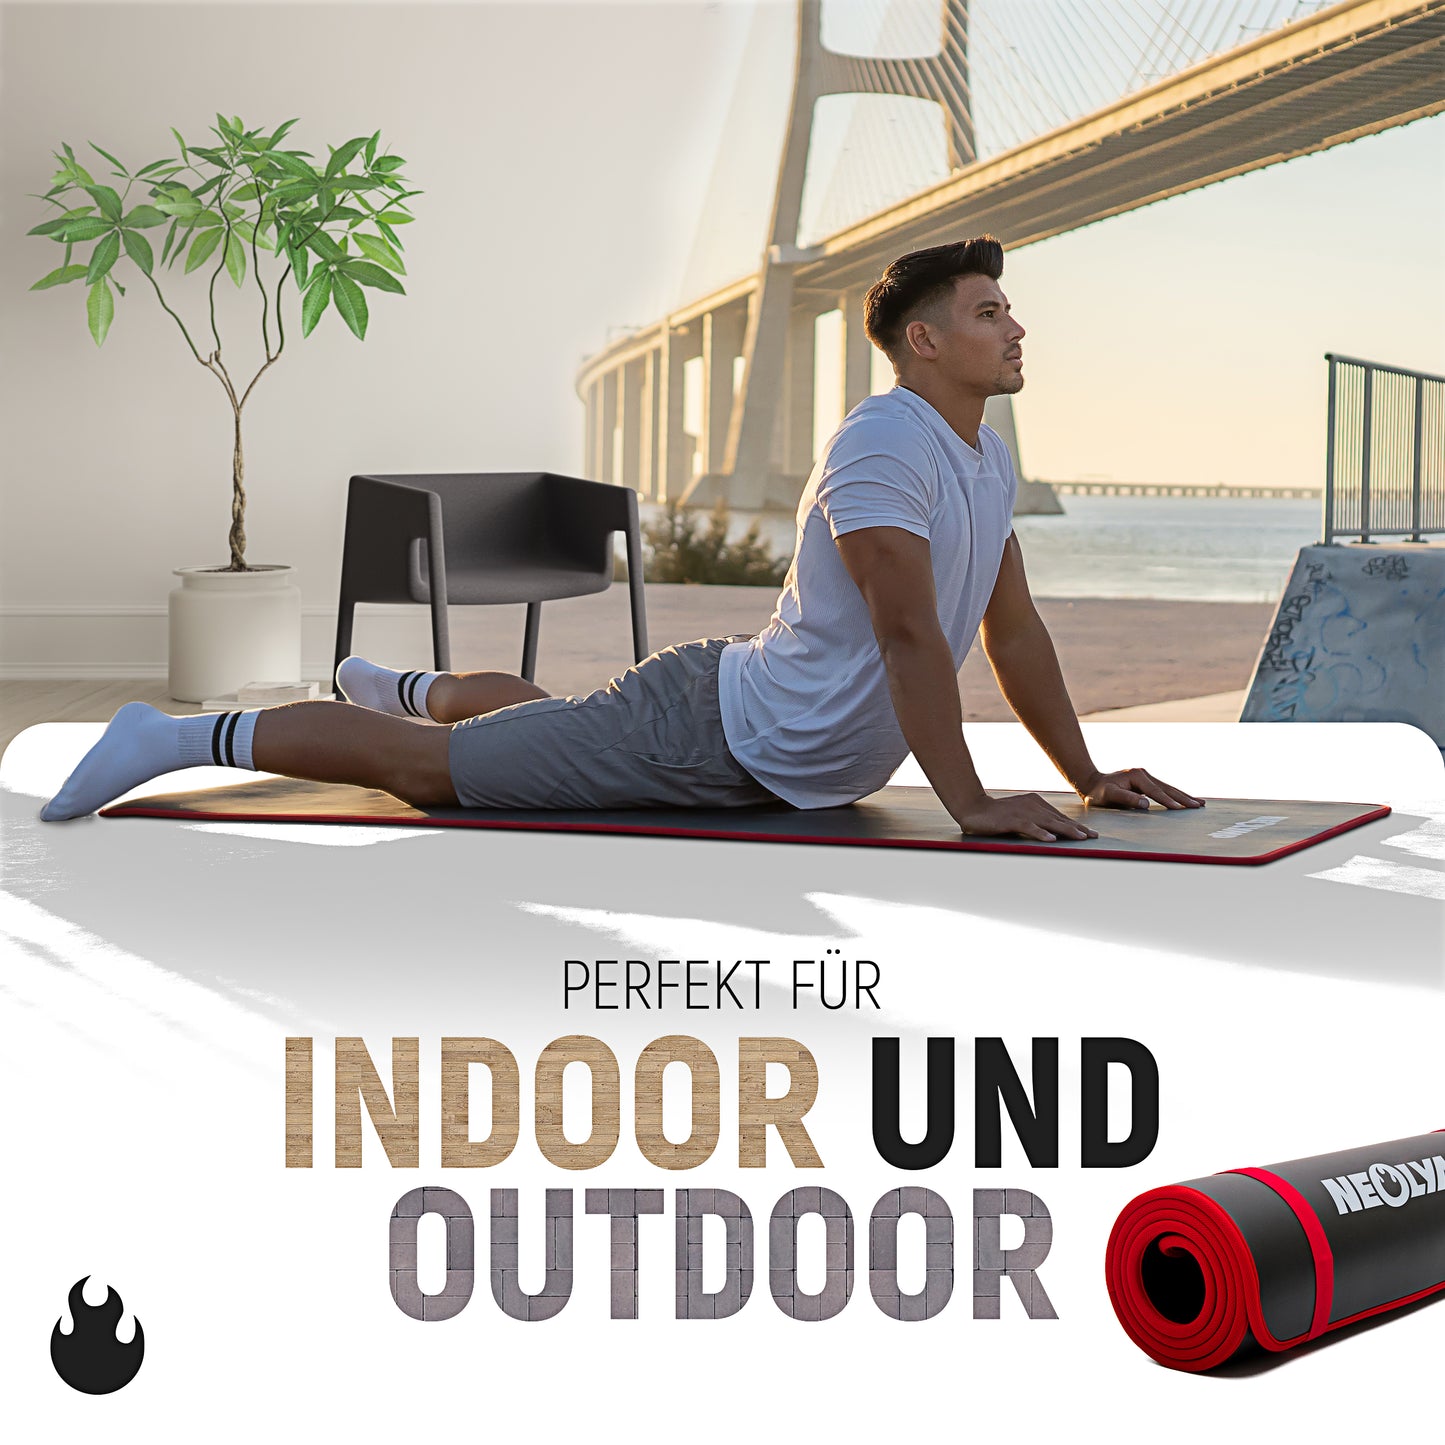 Fitness mat - extra thick and non-slip